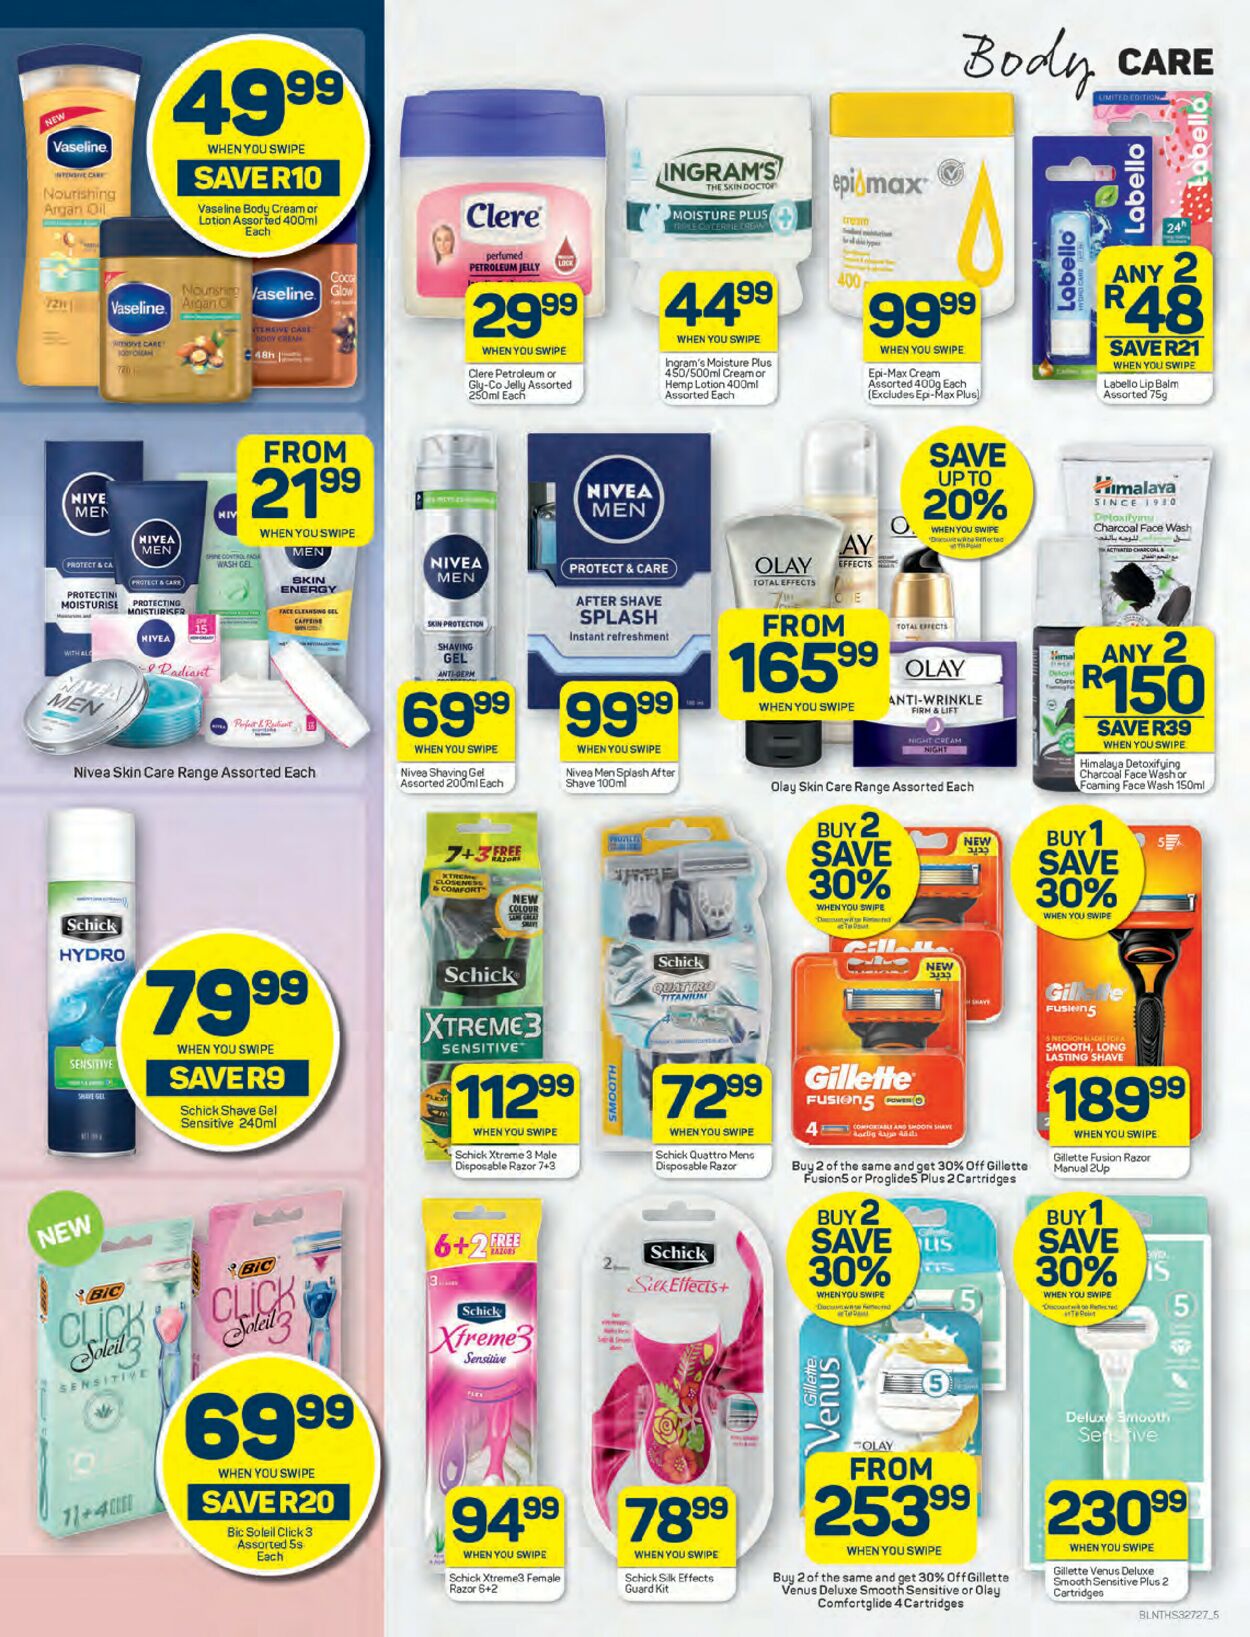 Pick n Pay Catalogue - 2023/04/24-2023/05/07 (Page 5)